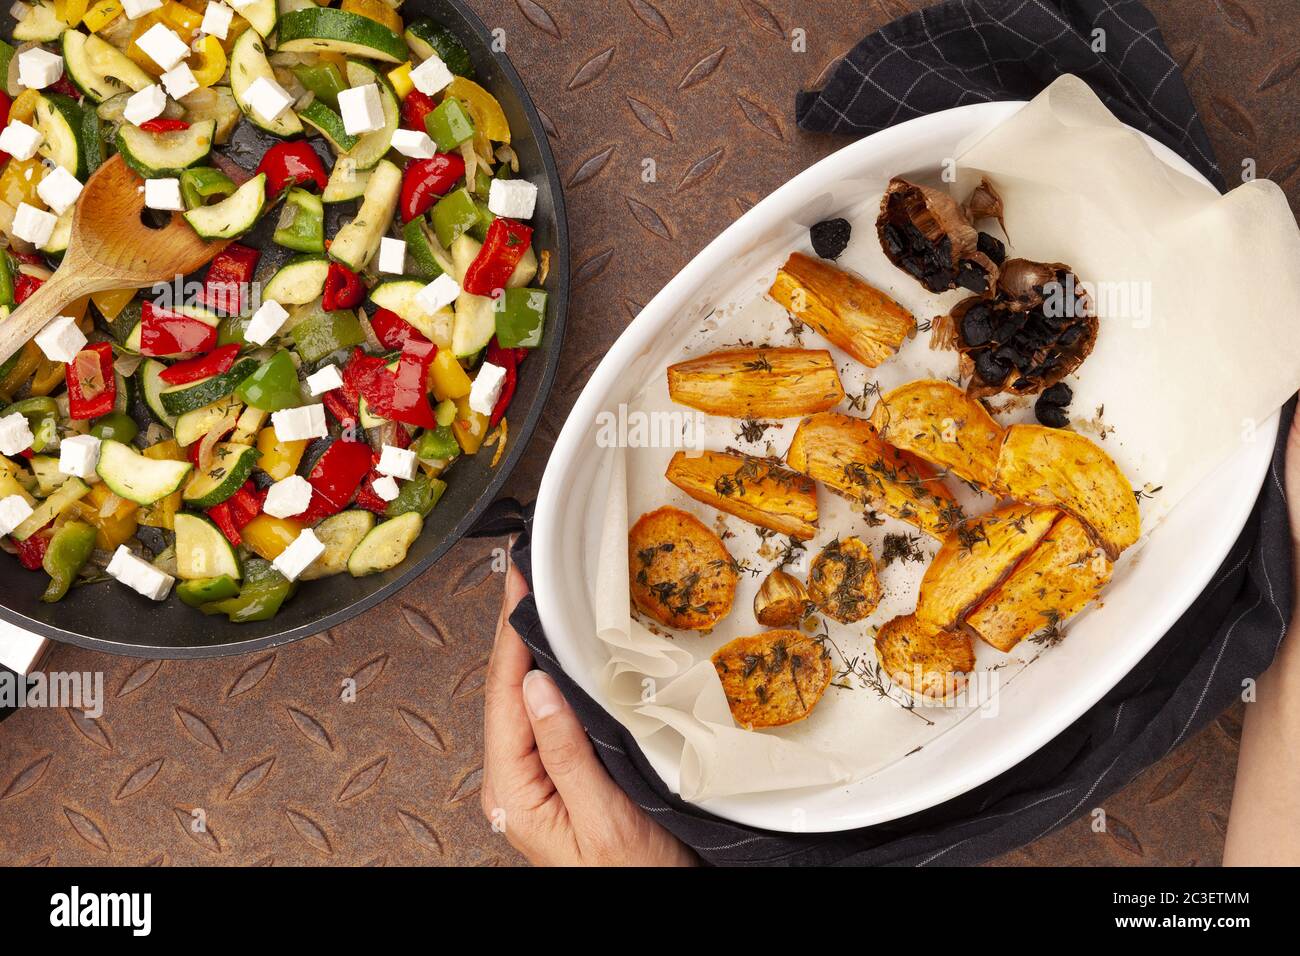 Barbecue mix vegetables with baked sweet potatoes. Stock Photo